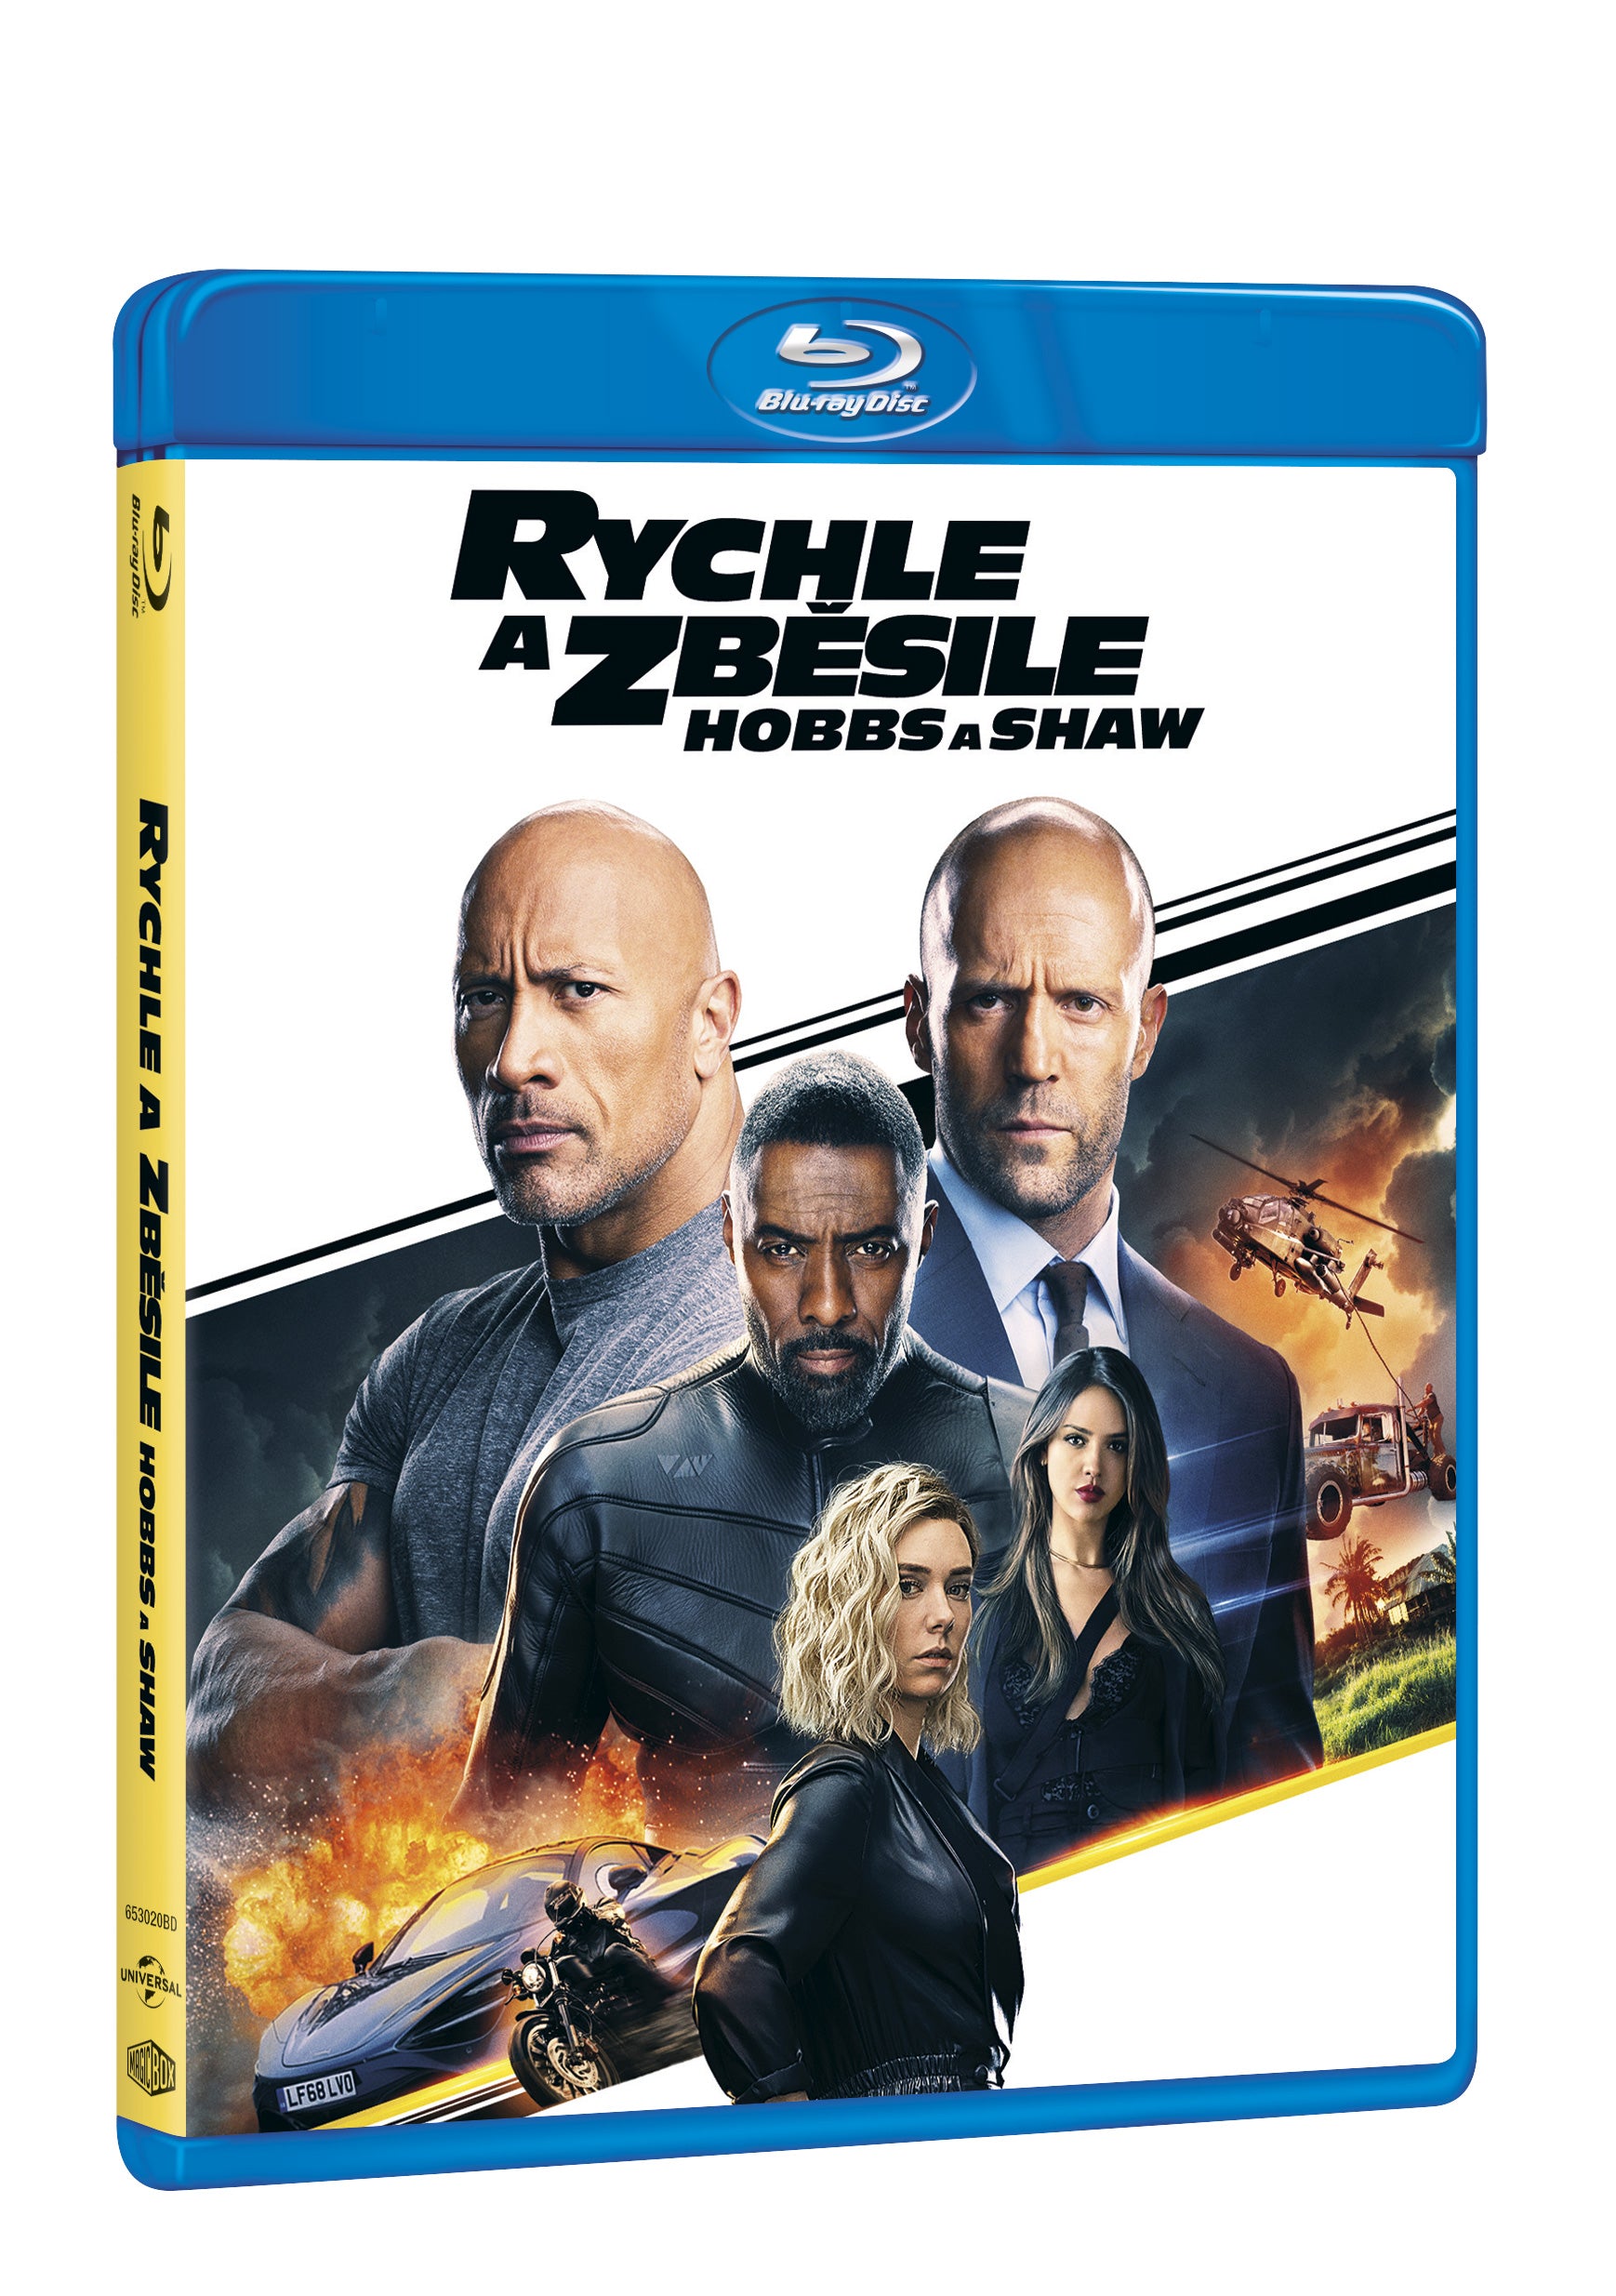 Rychle a zbesile: Hobbs a Shaw BD / Fast & Furious Presents: Hobbs & Shaw - Czech version